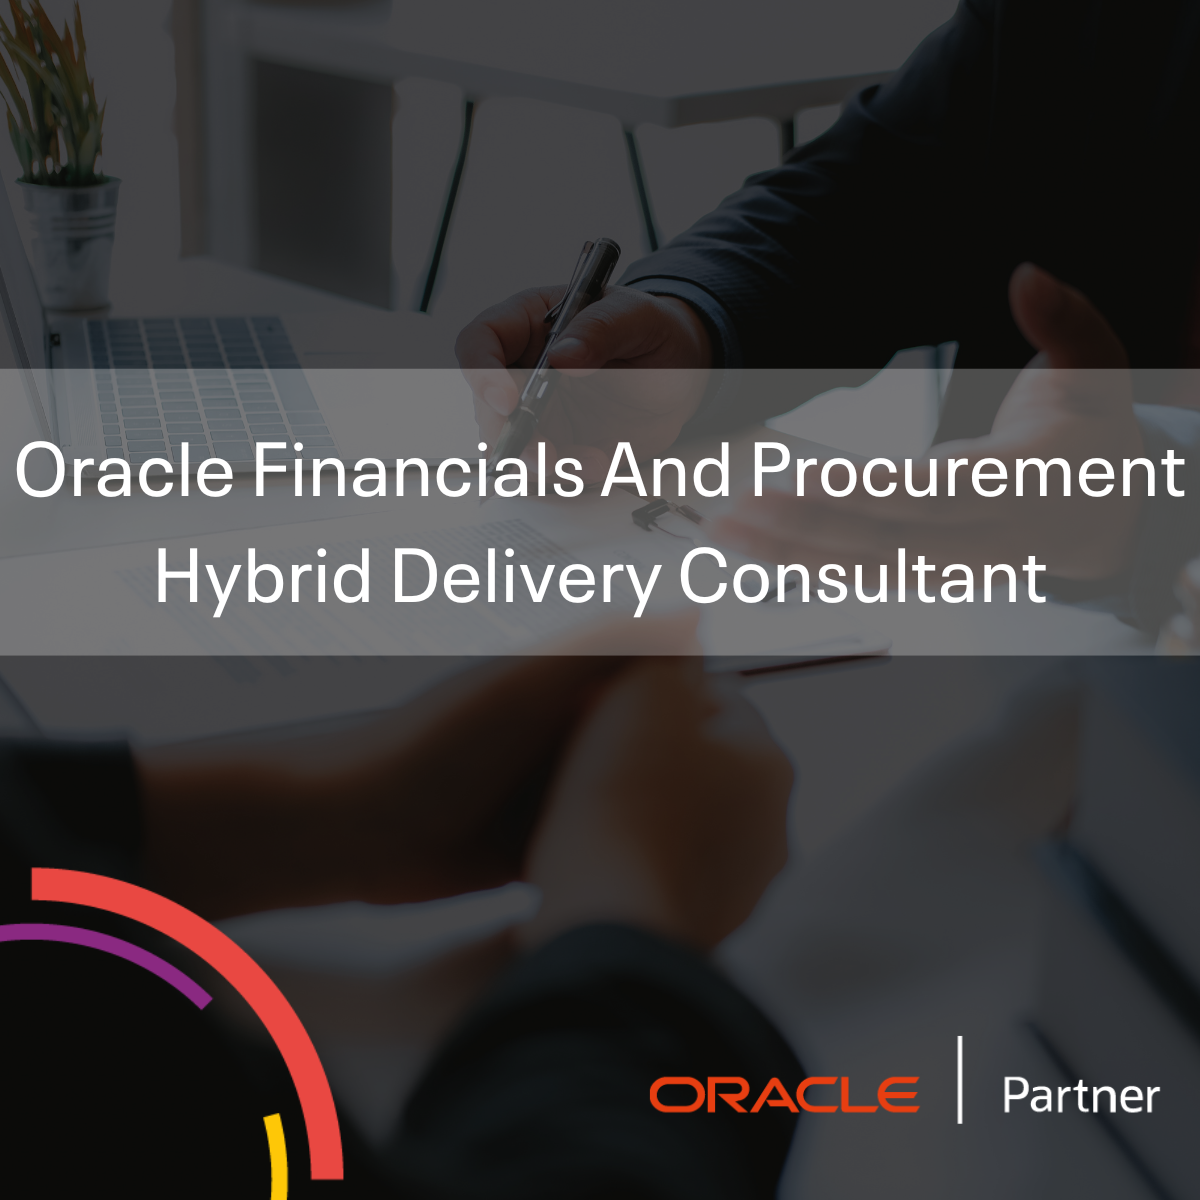 Oracle Financials And Procurement Hybrid Delivery Consultant